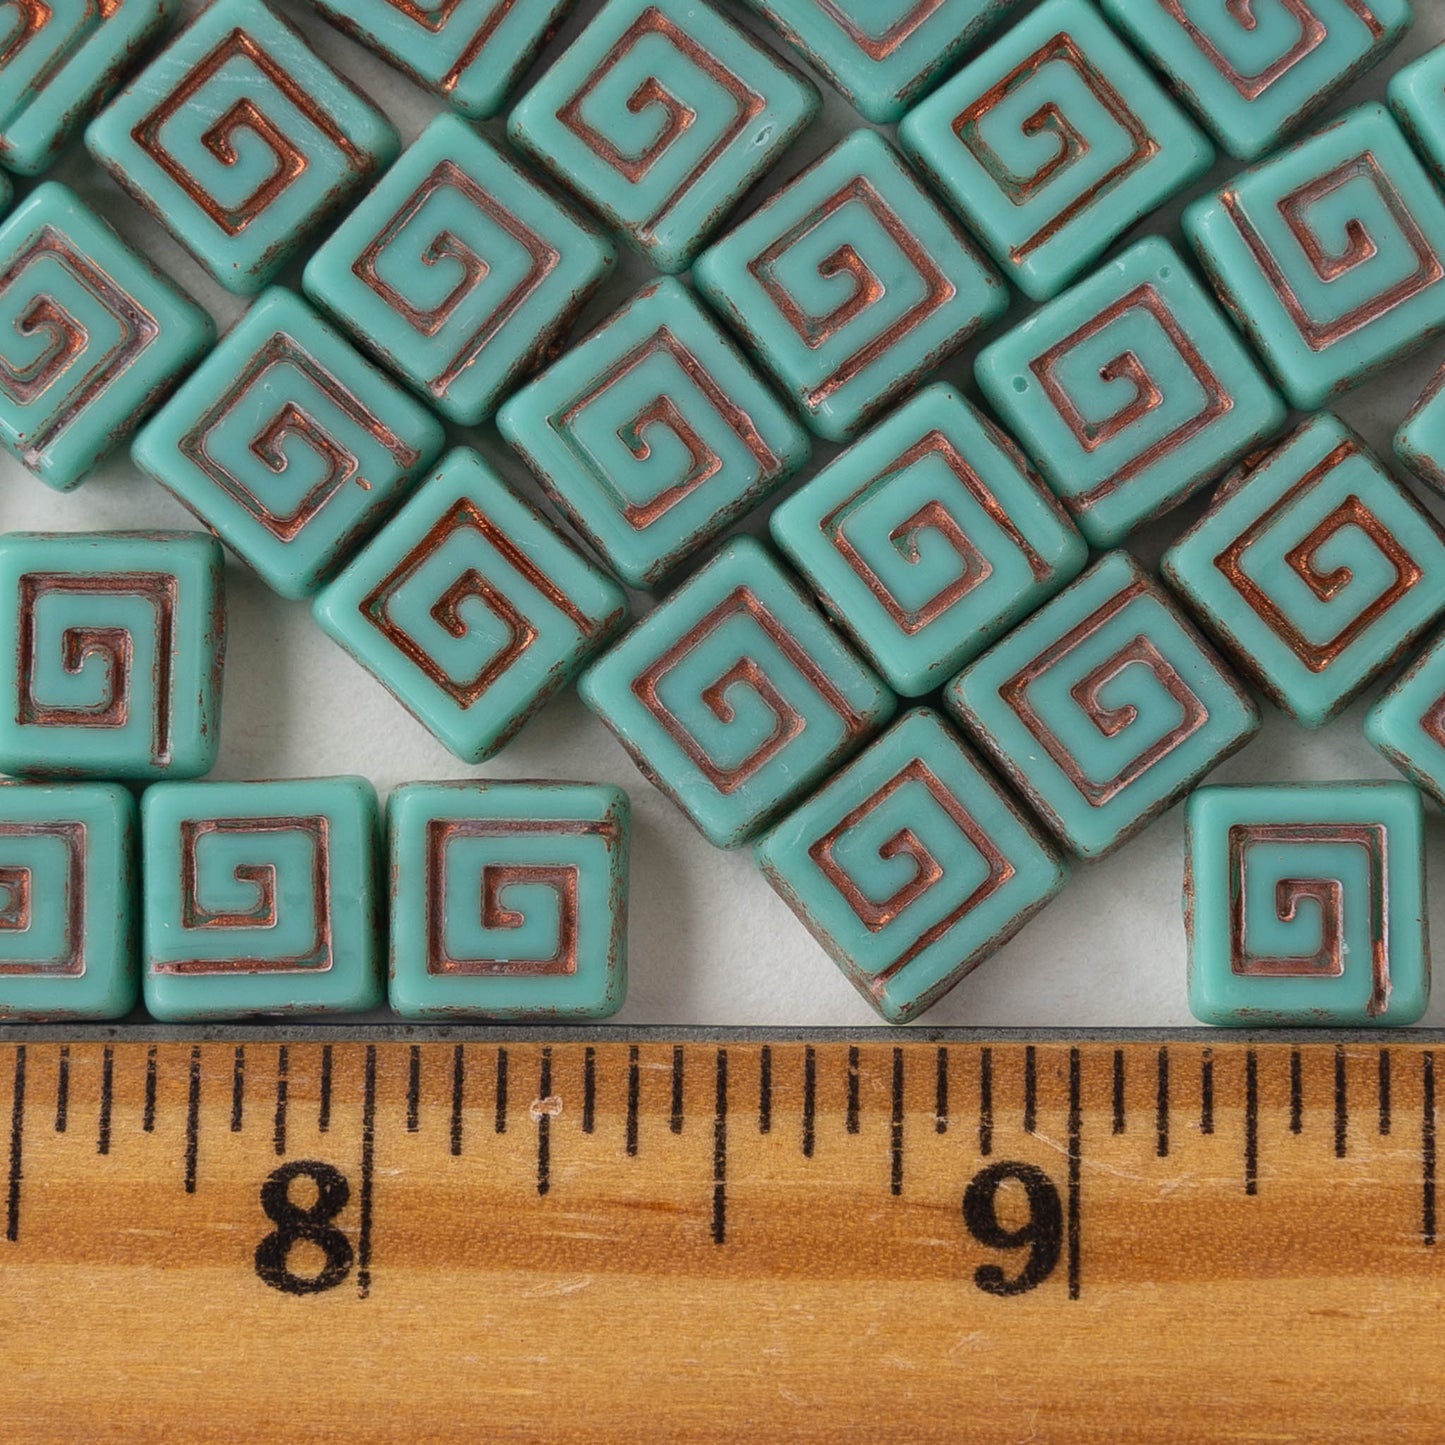 9mm Glass Tile Beads - Opaque Turquoise with Gold Wash - 10